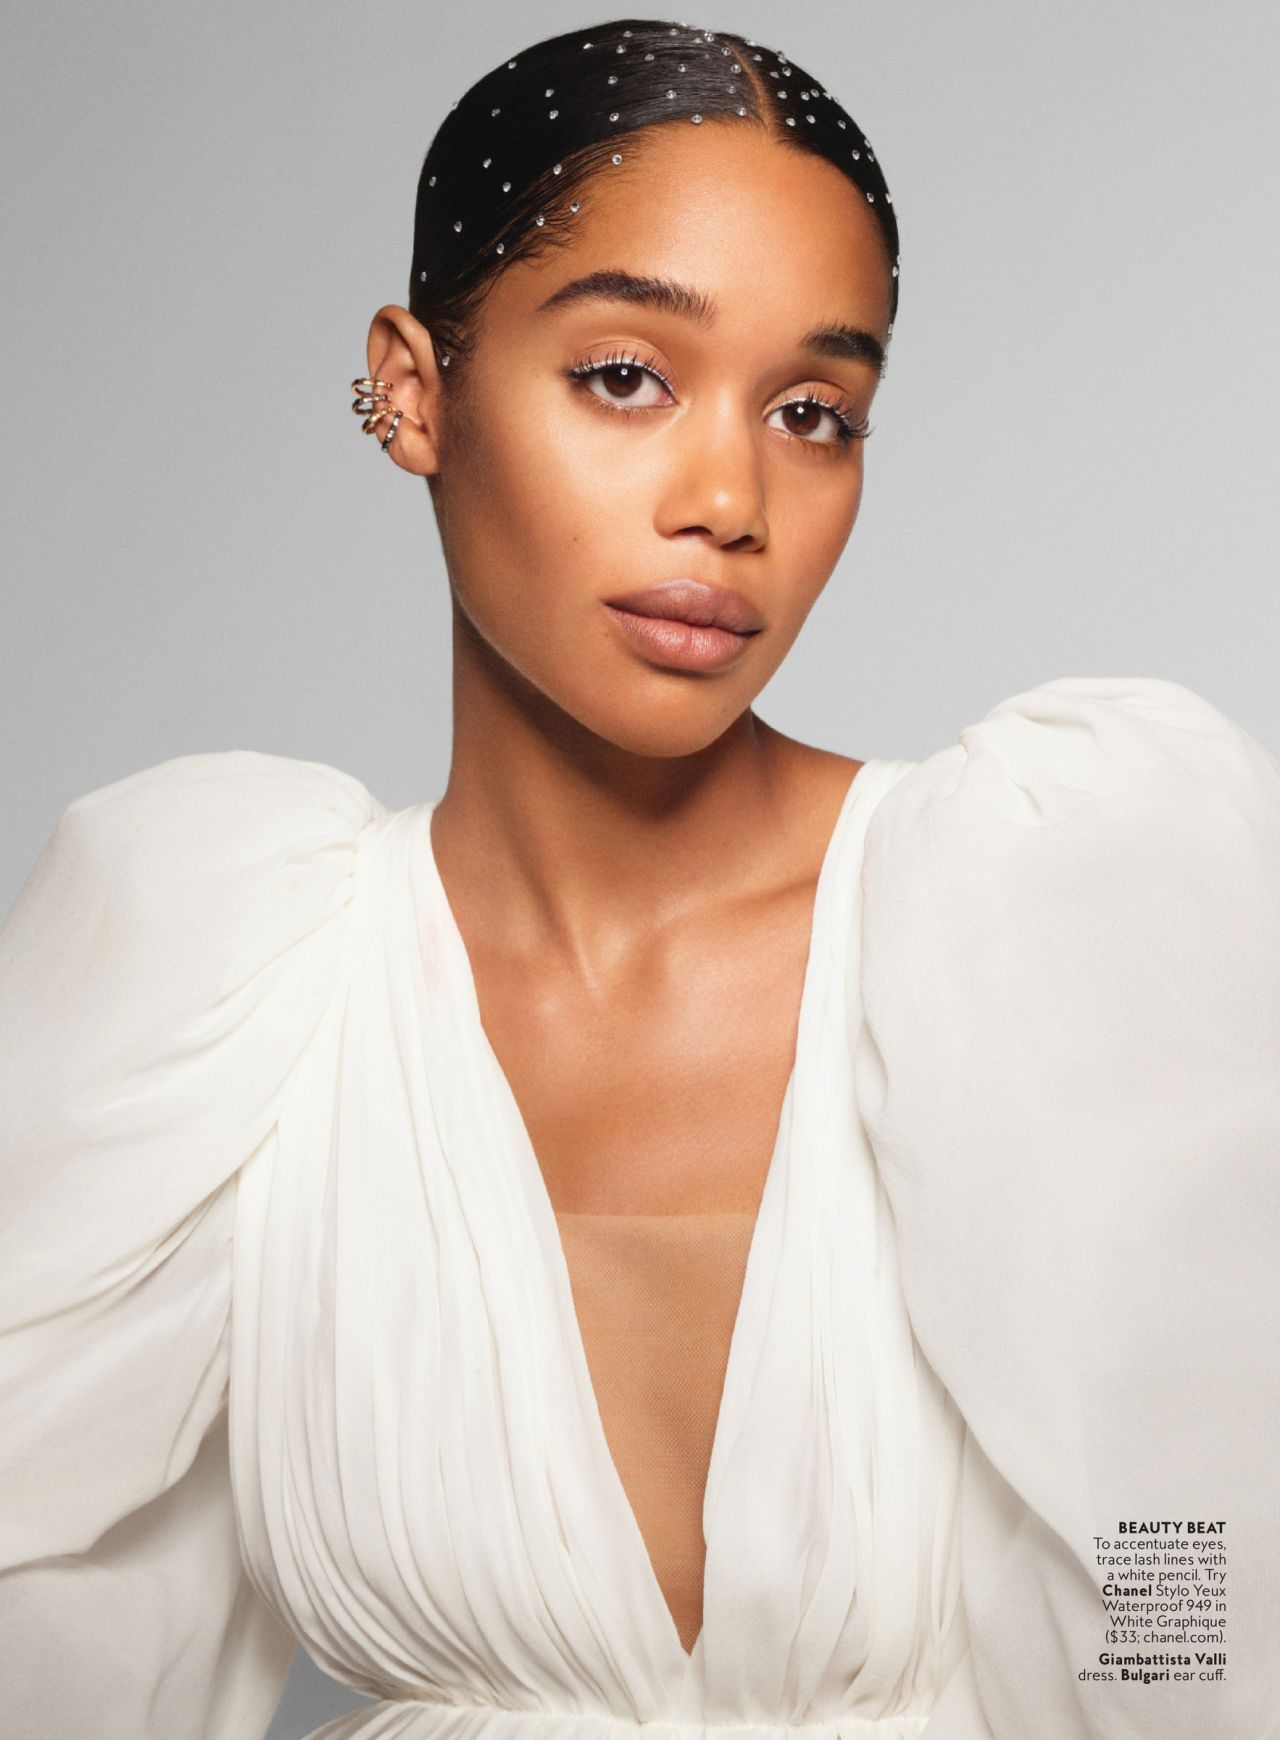 laura-harrier-instyle-magazine-may-2020-issue-6